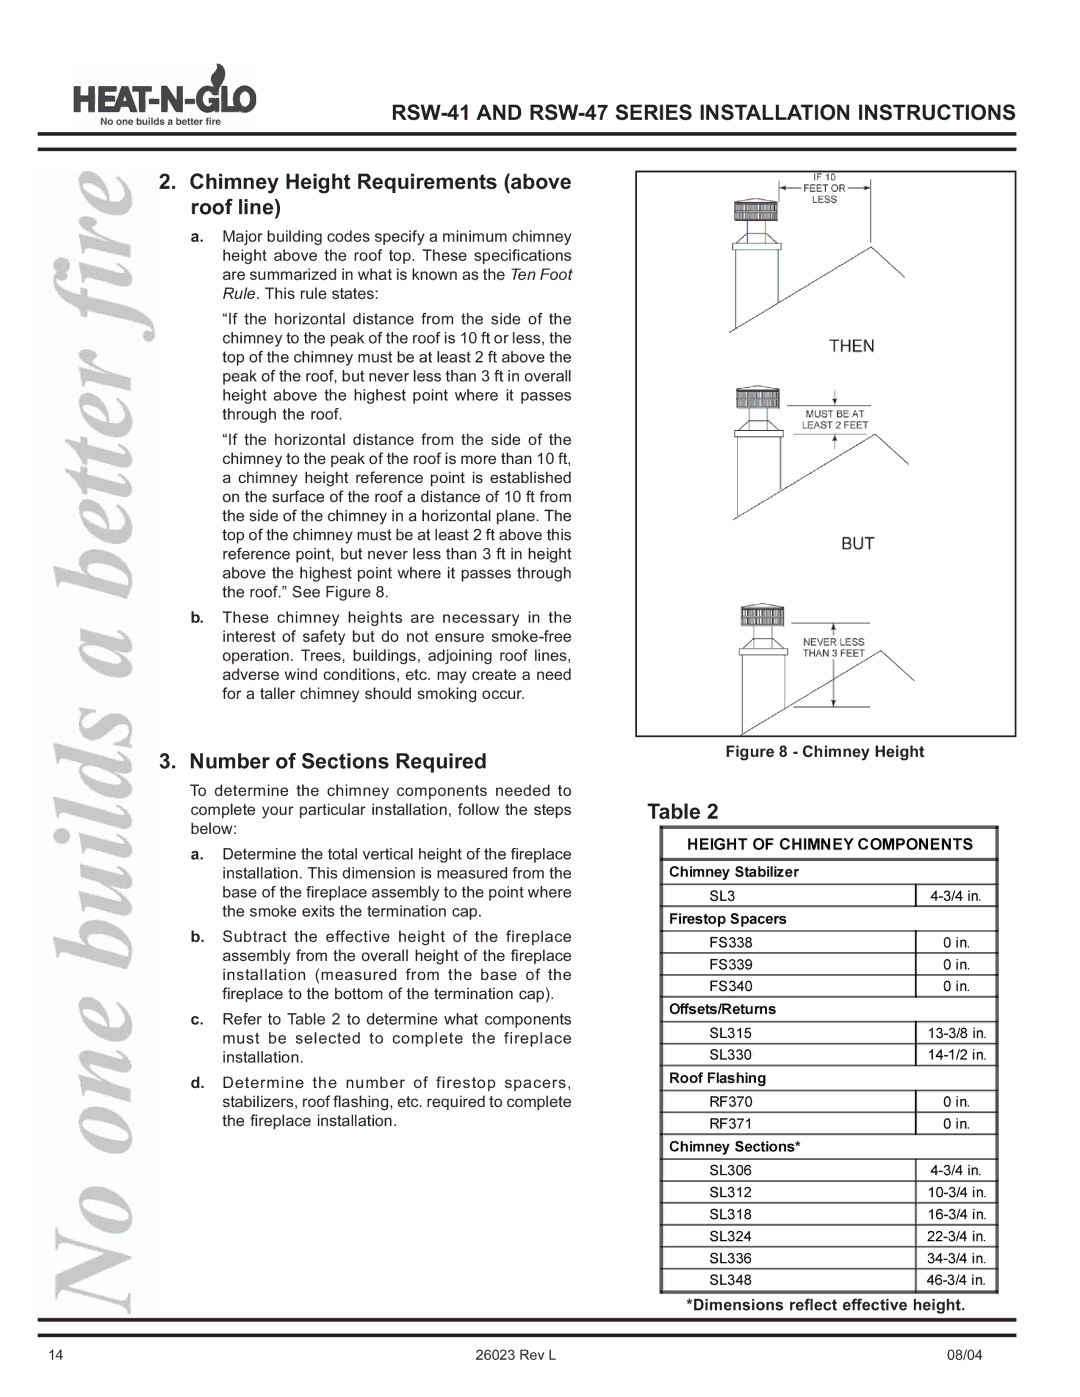 Hearth and Home Technologies RSW-41, RSW-47 manual Chimney Height Requirements above roof line, Number of Sections Required 